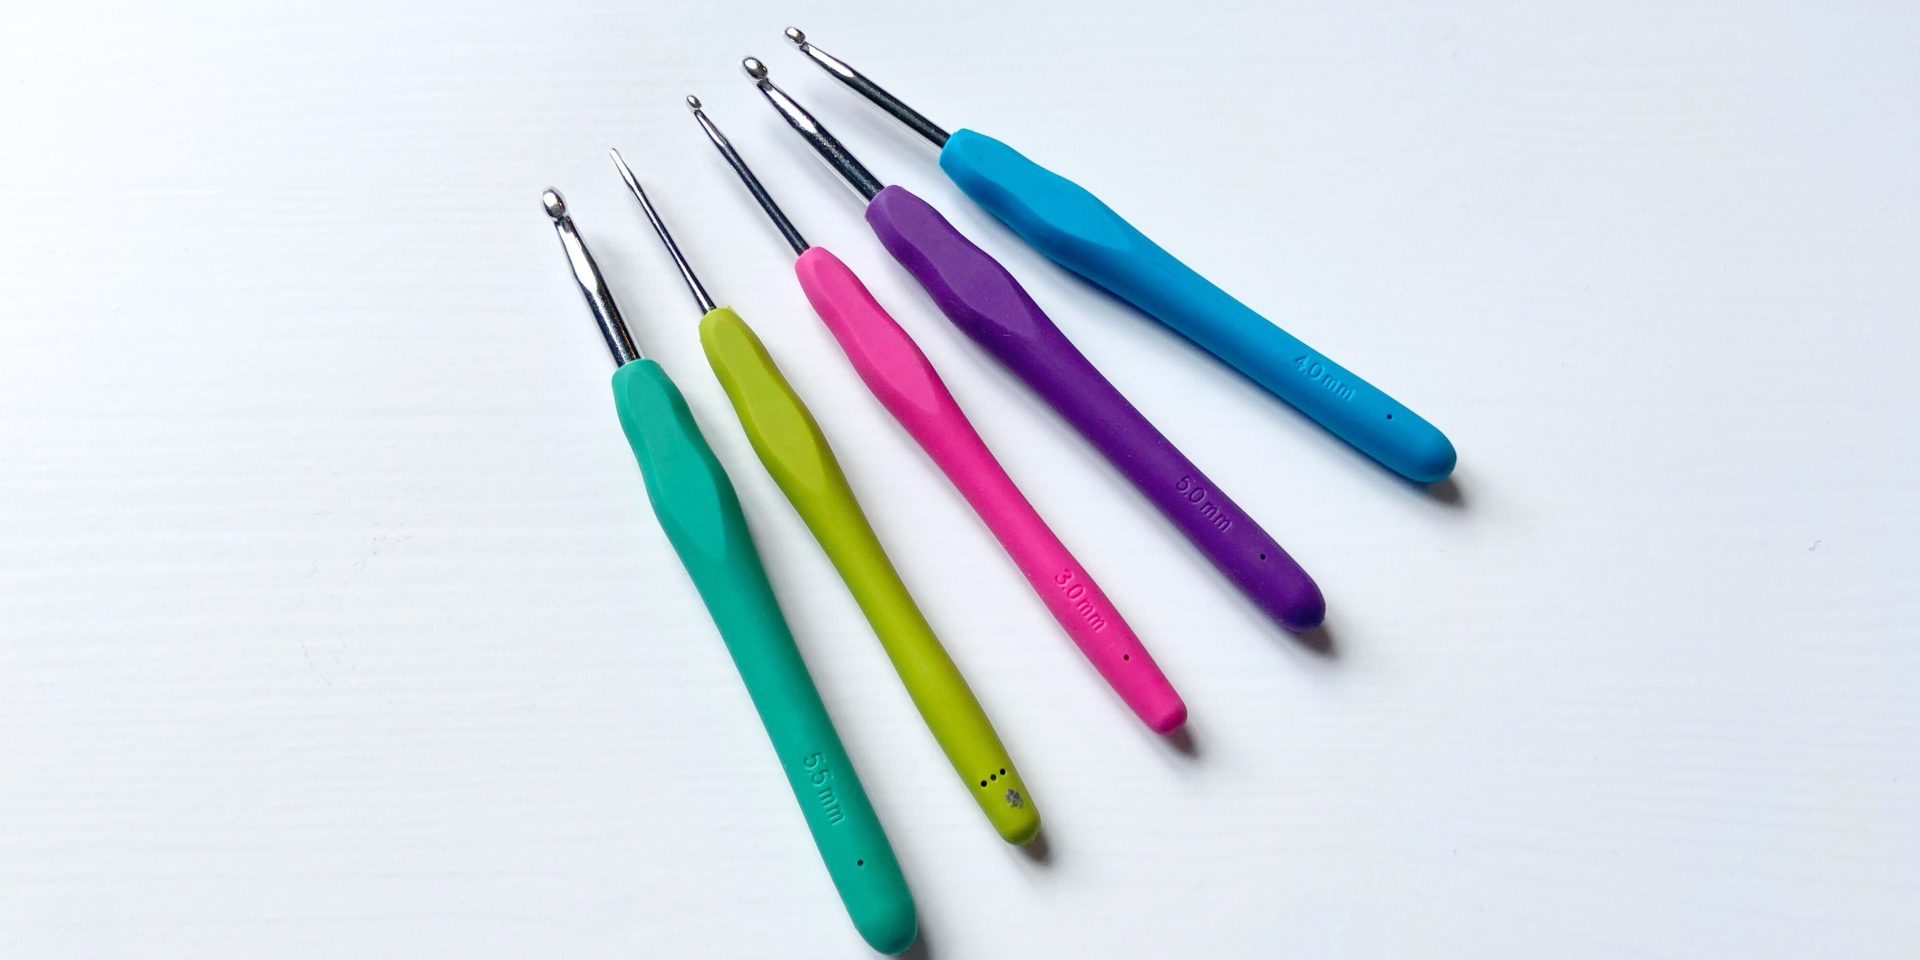 How to Choose the Right type and size of a Crochet Hook?